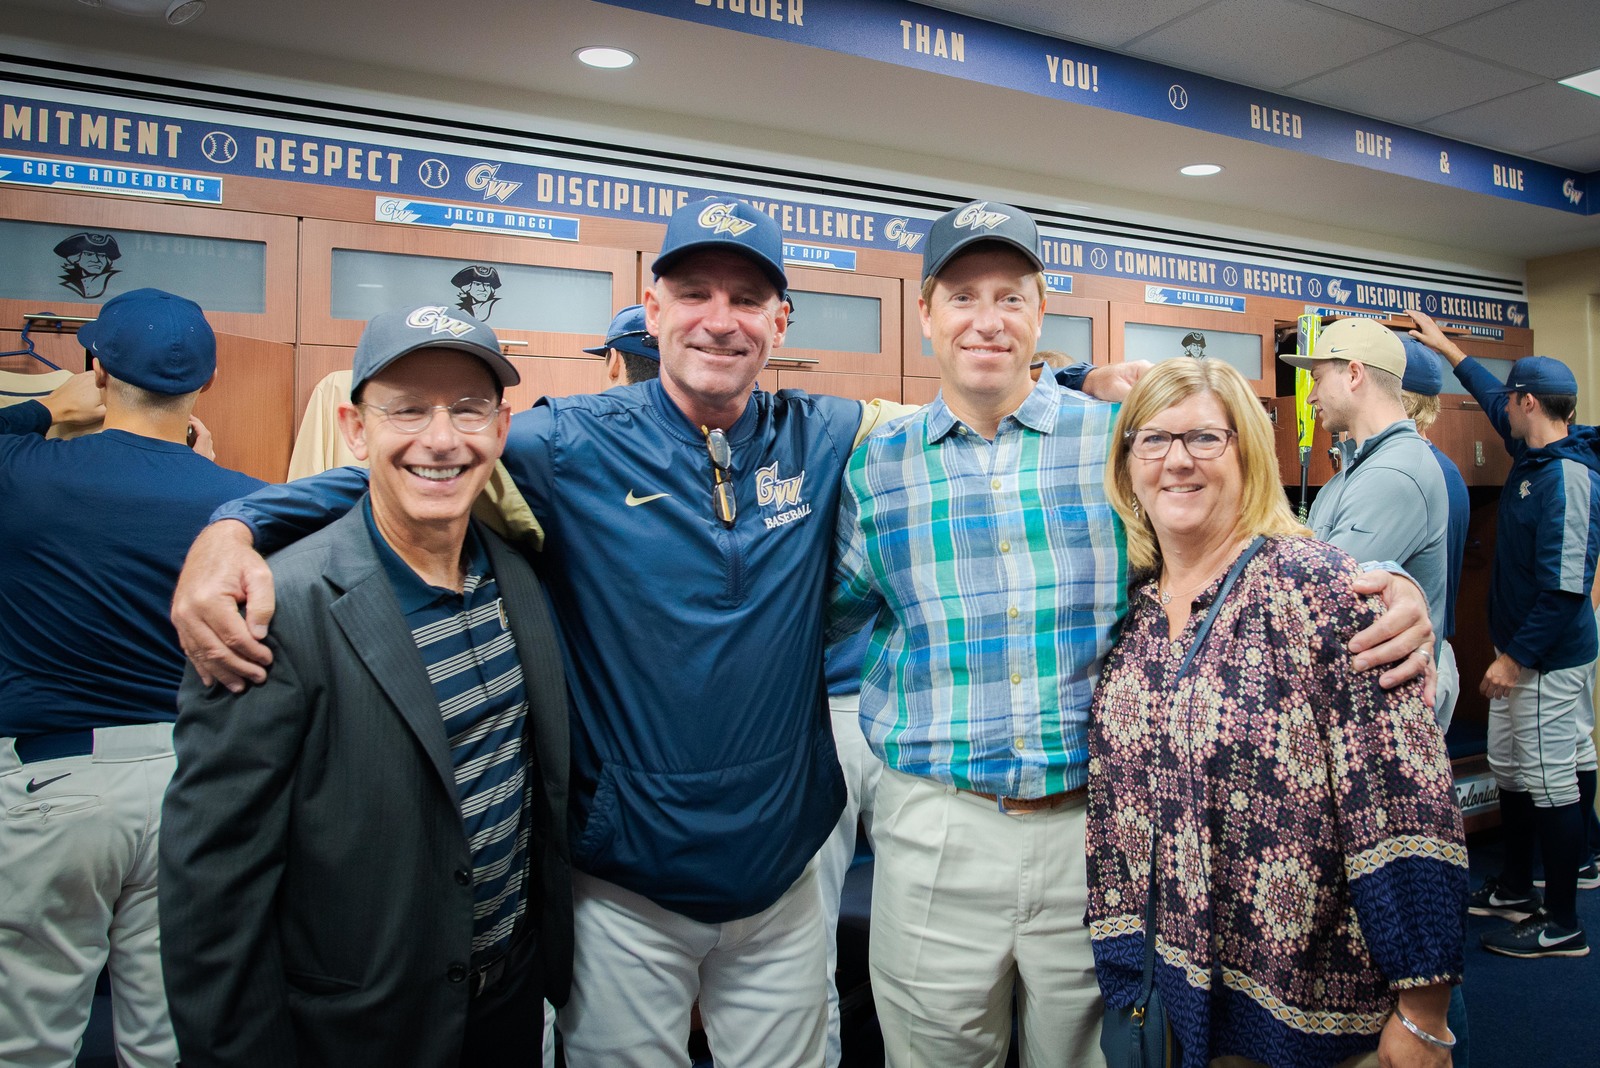 Ave Tucker, BBA '77, Coach Ritchie, and parents Dave and Tam Fassnacht P '20